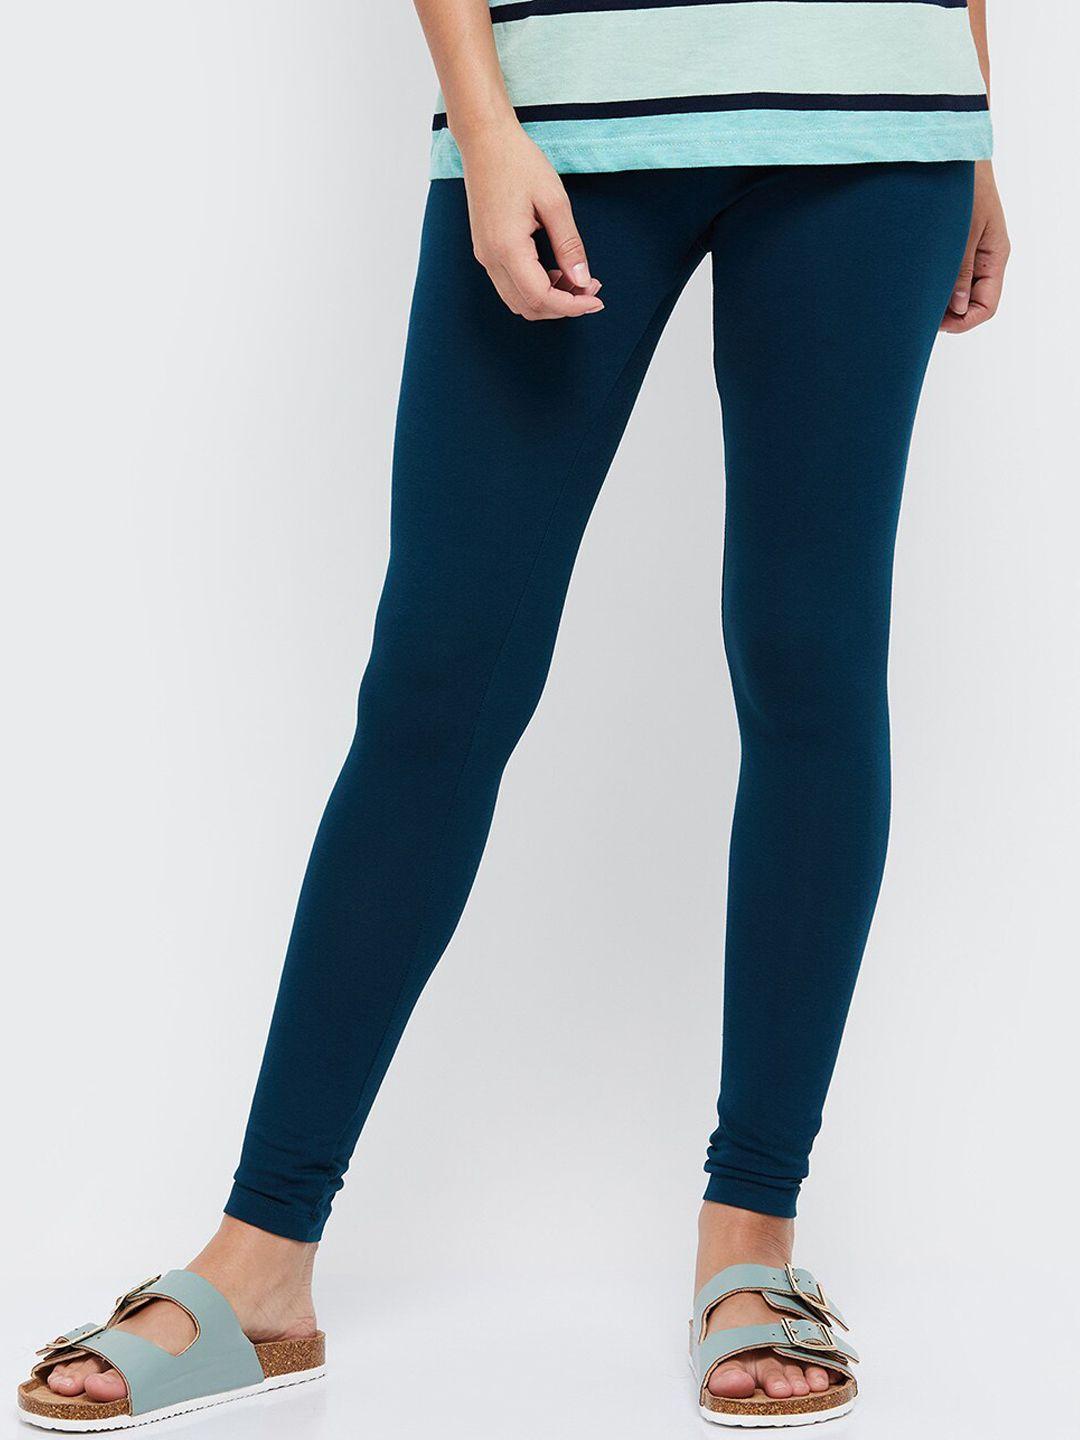 max women teal blue solid ankle-length leggings